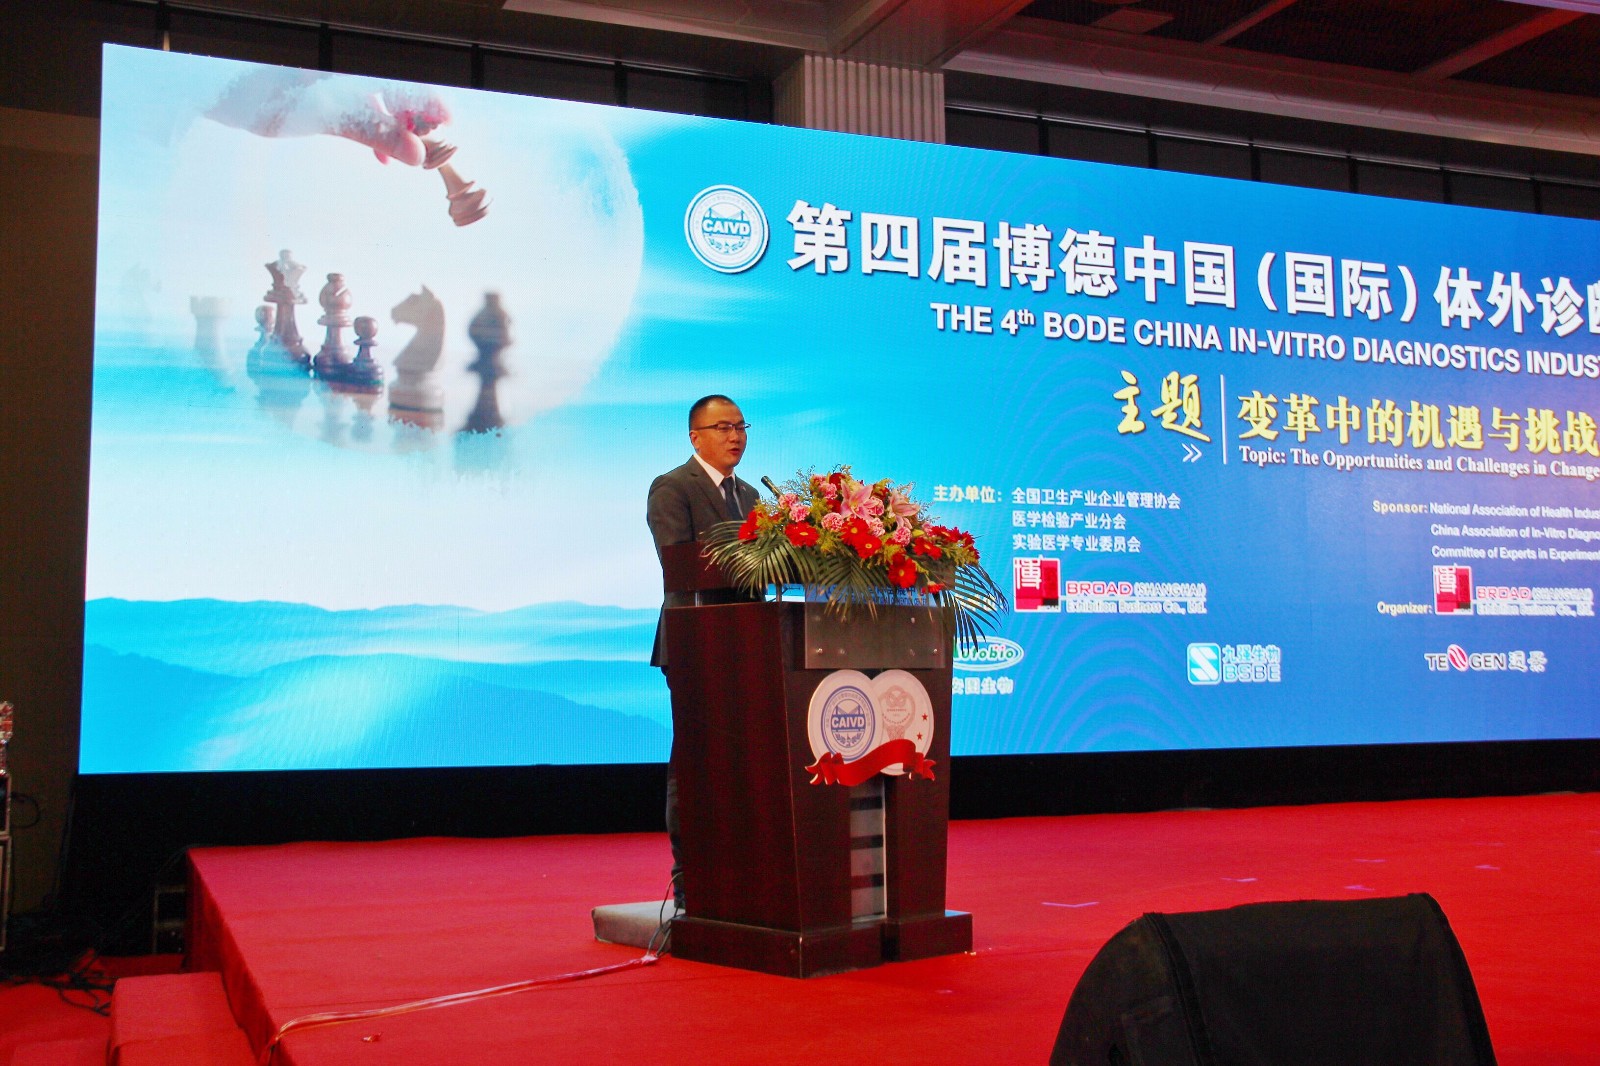 Salutatory of The 4th Bode China (International) IVD Industry Forum